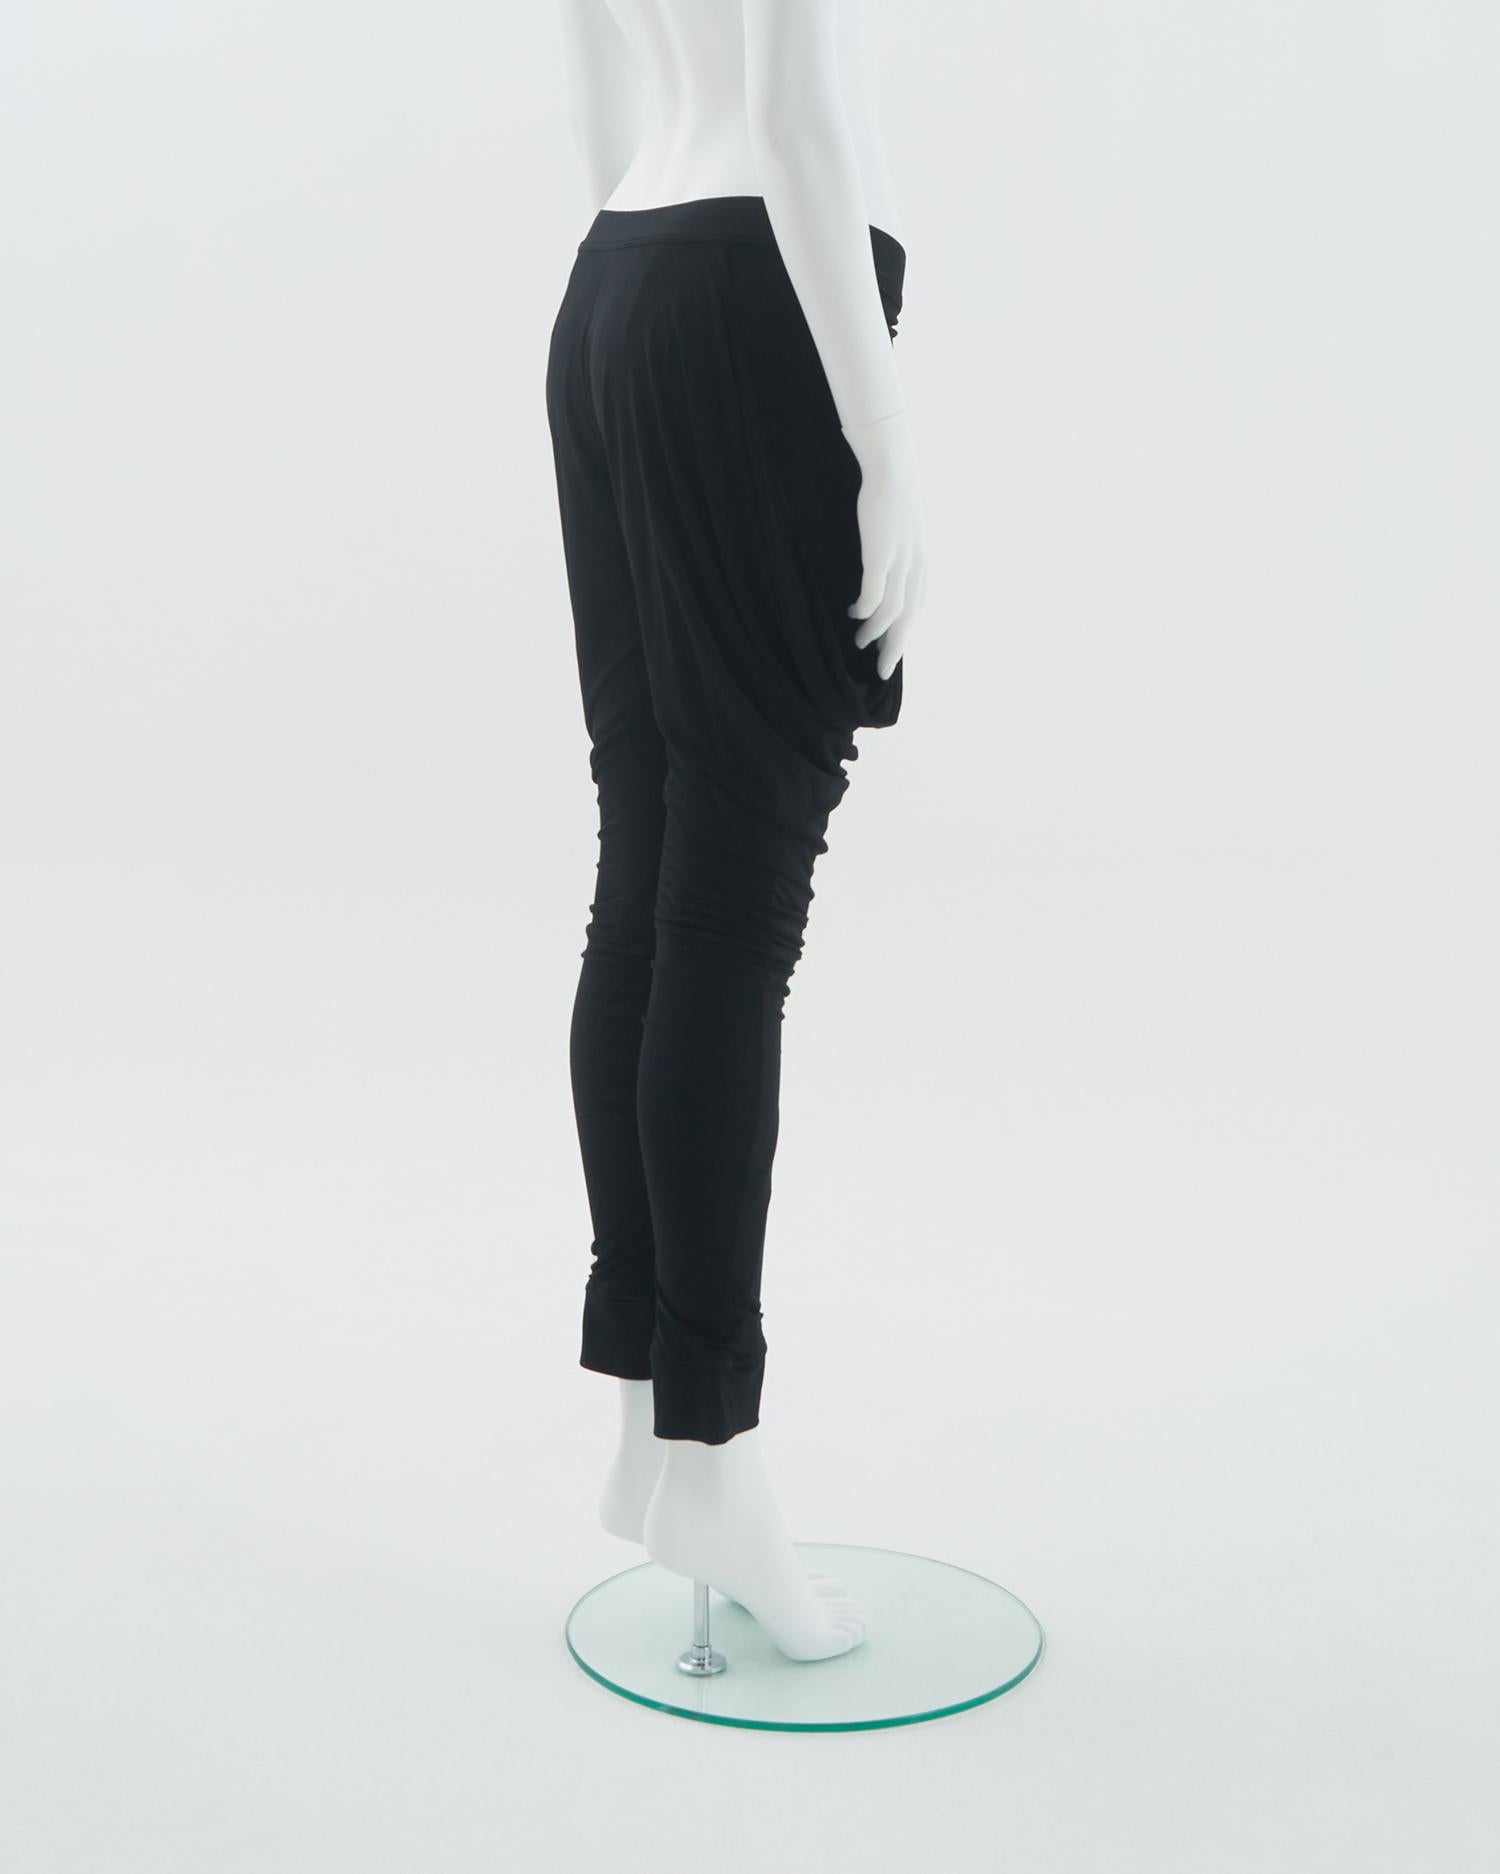 Fendi S/S 2007 Black lycra harem pants  In Excellent Condition For Sale In Milano, IT